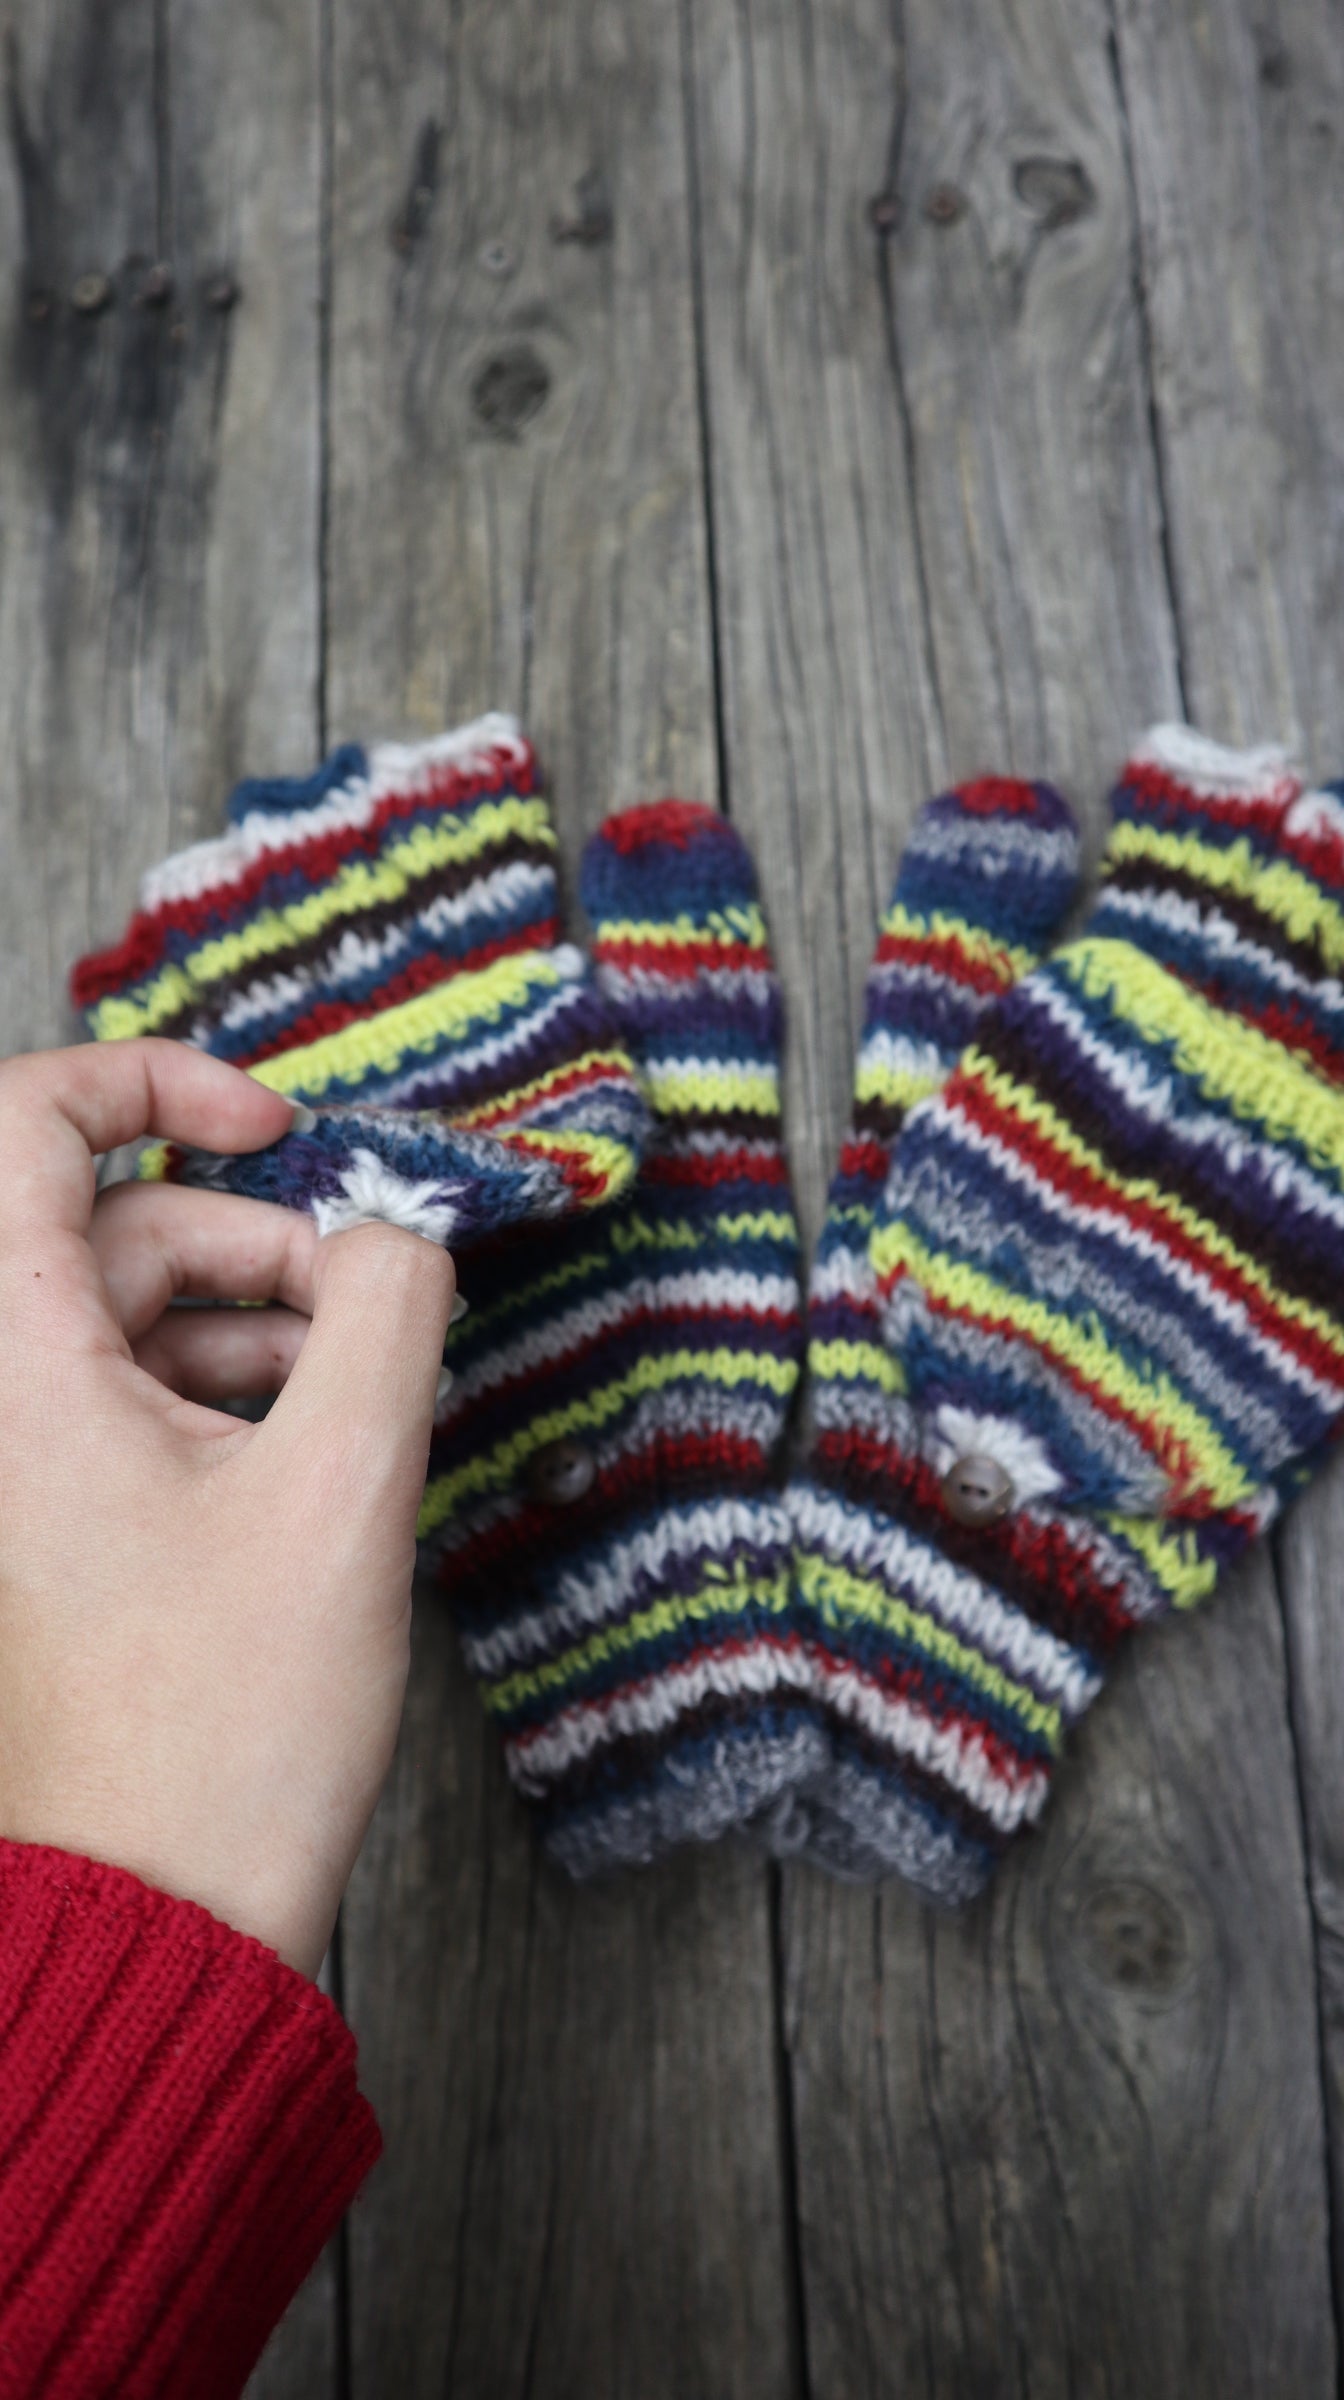 Fair Trade Ethical Adult Fingerless Gloves with Cap in Striped Design Yellows